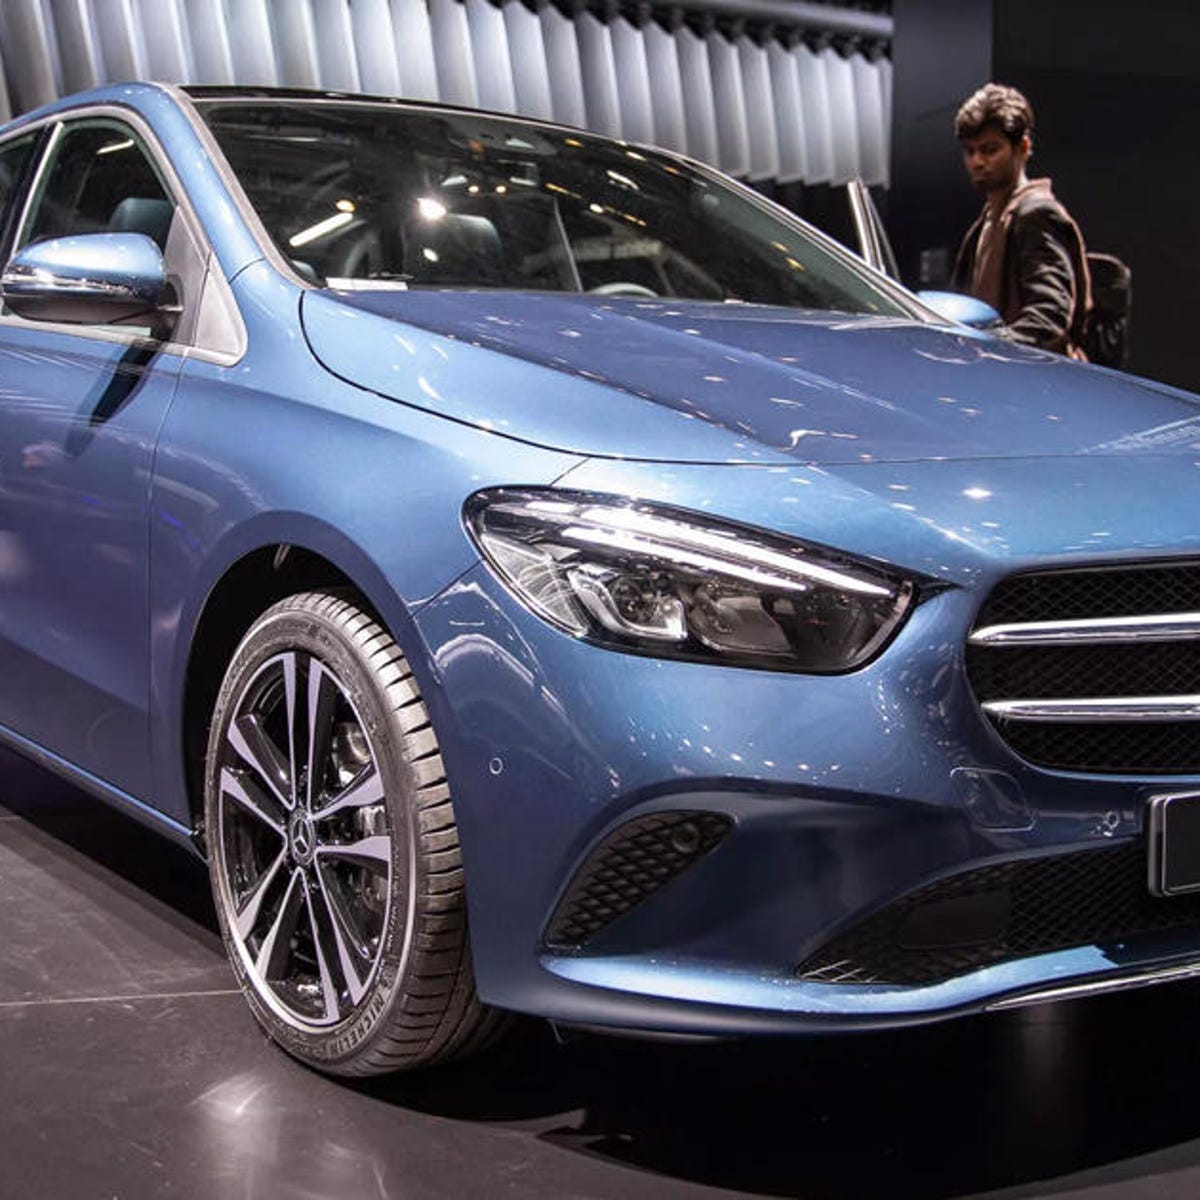 Euro-spec Mercedes-Benz B-Class combines two things American